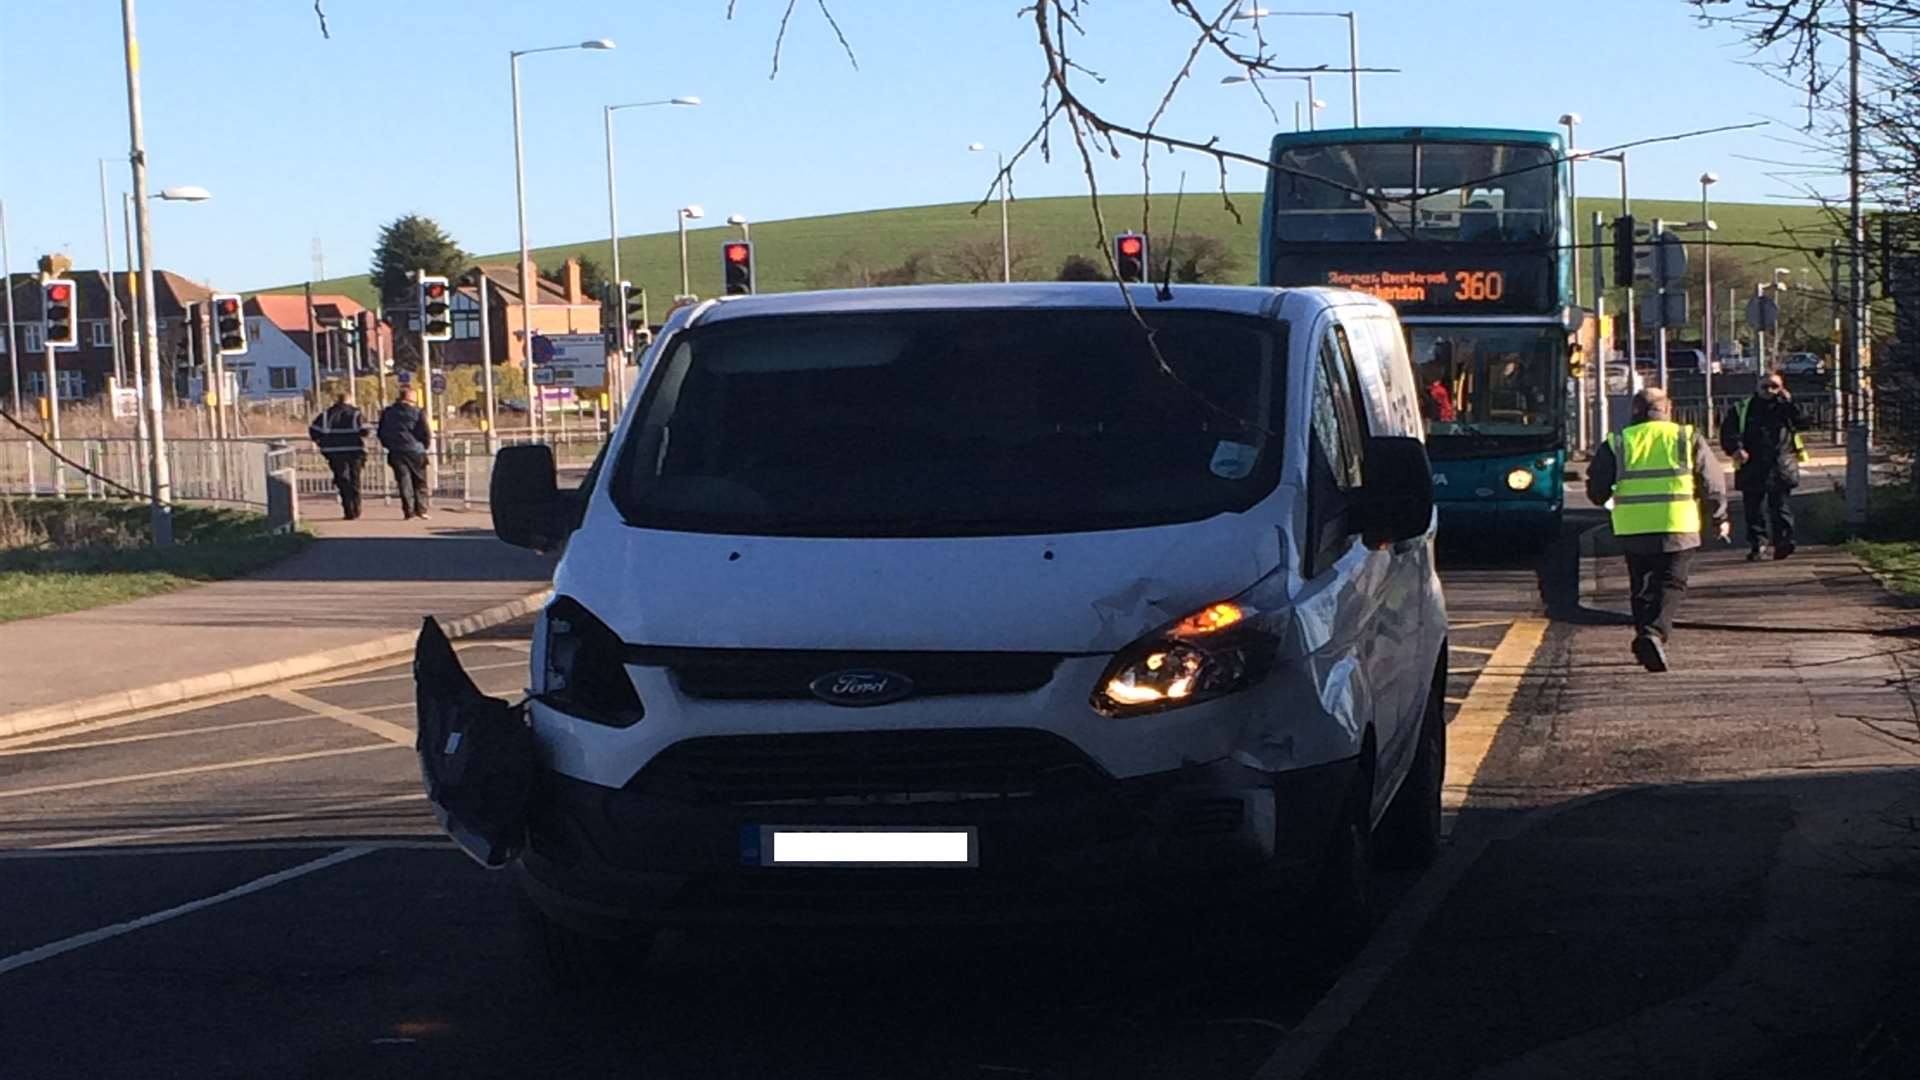 The van and bus involved in the crash in Queenborough